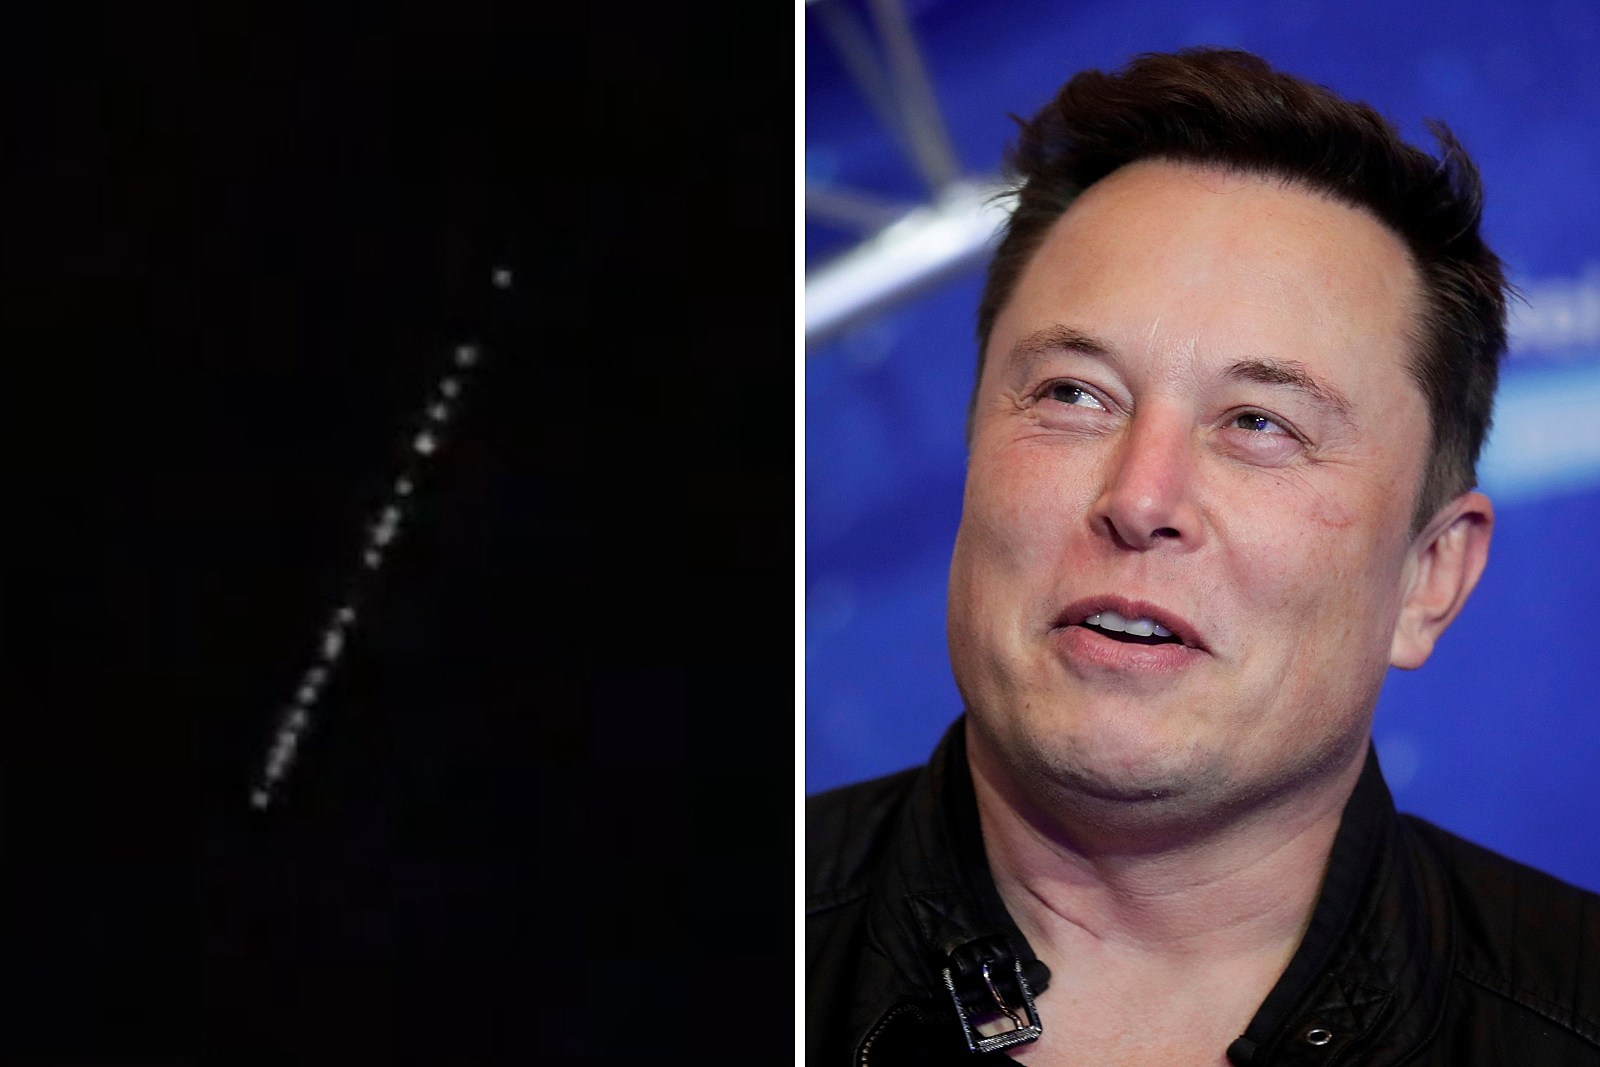 Starlink satellites look strange, but they're not UFOs. They belong to Elon  Musk.